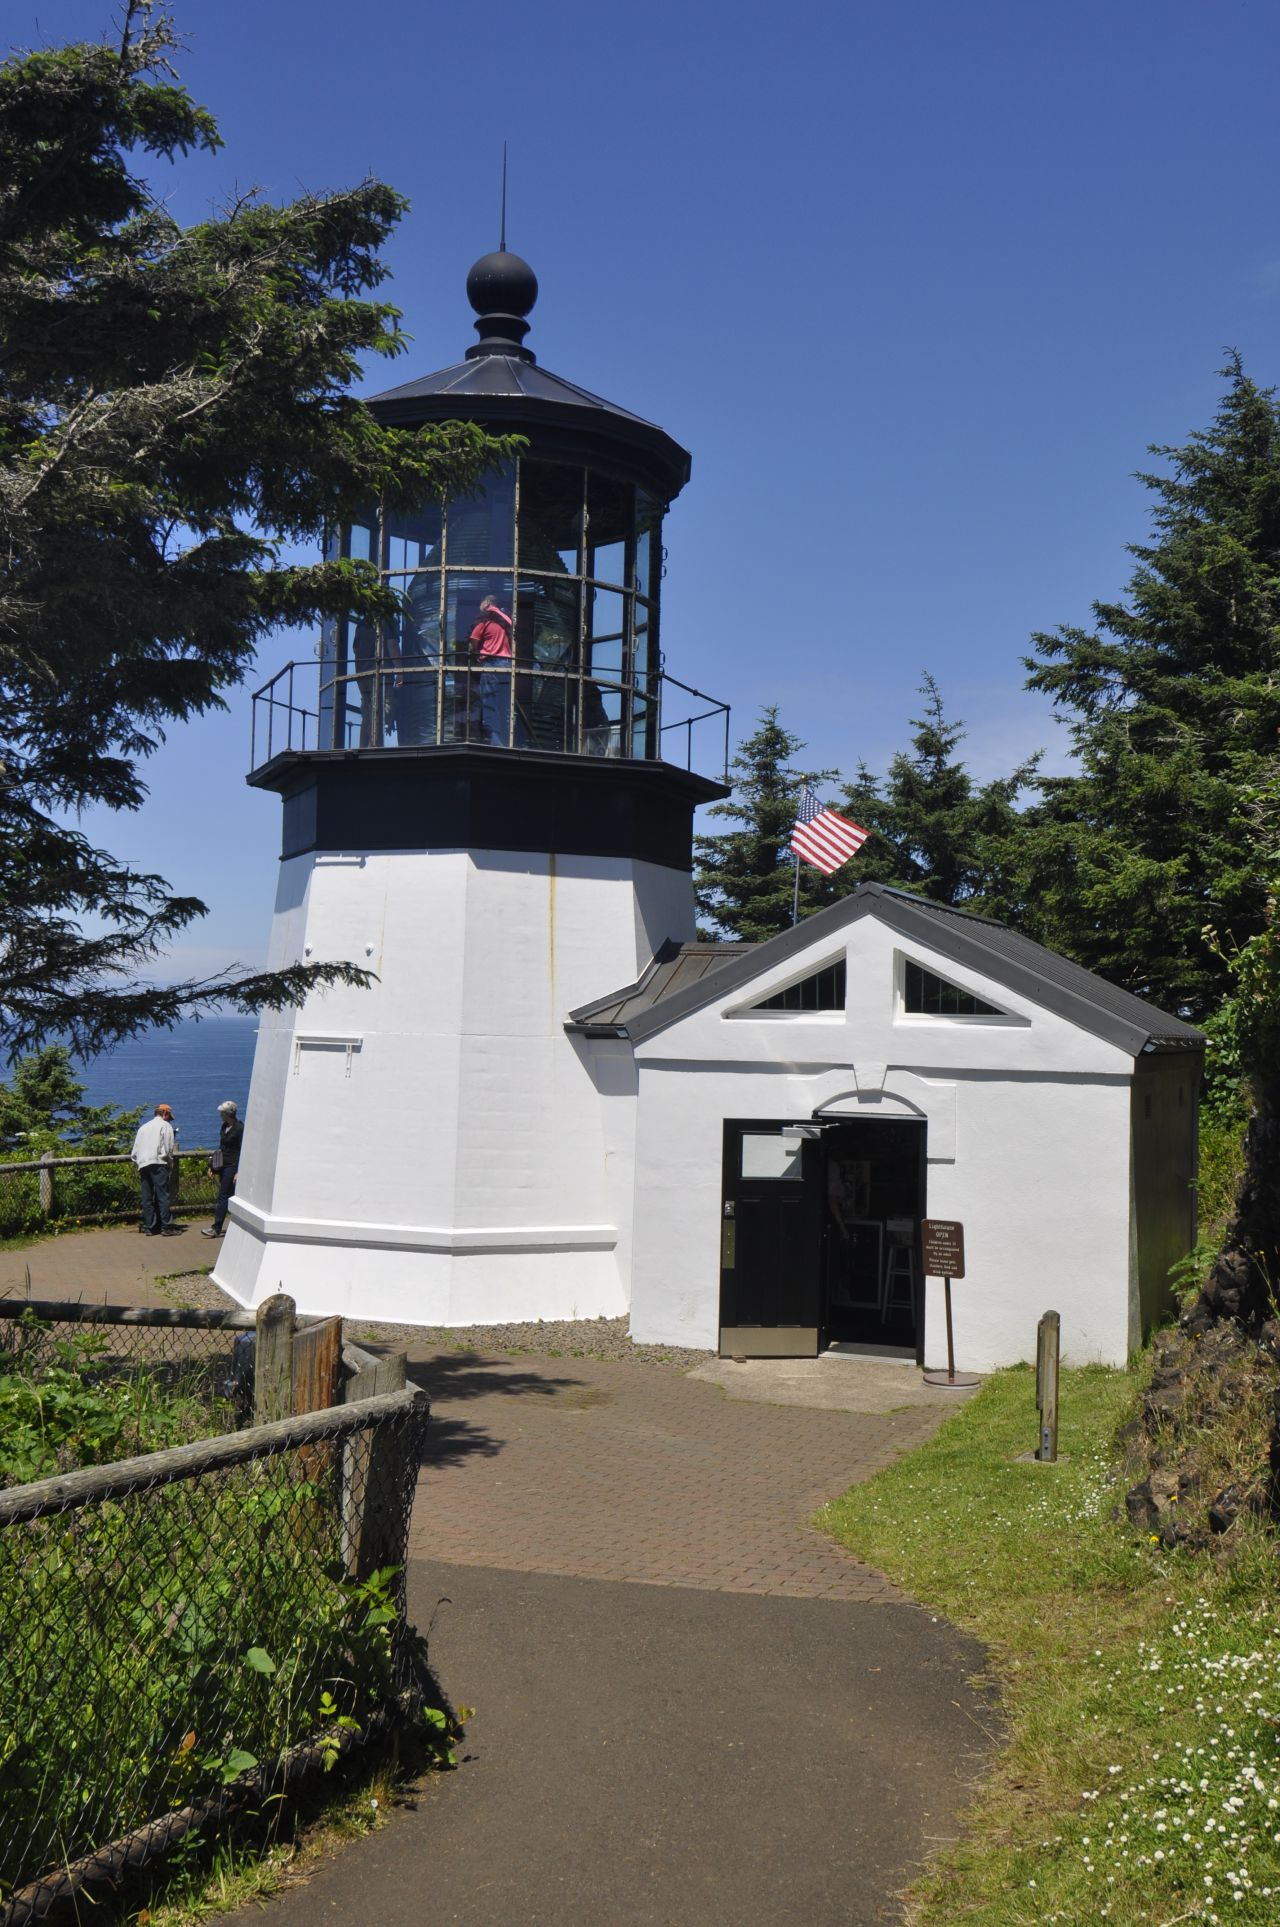 <a href="http://ireport.cnn.com/docs/DOC-1159168">Bob Myers l</a>ives in California, but visits Oregon's inactive Cape Meares Light once a year. "This was the very first lighthouse I had a chance to see up close," he said. "A bit like my first love?"